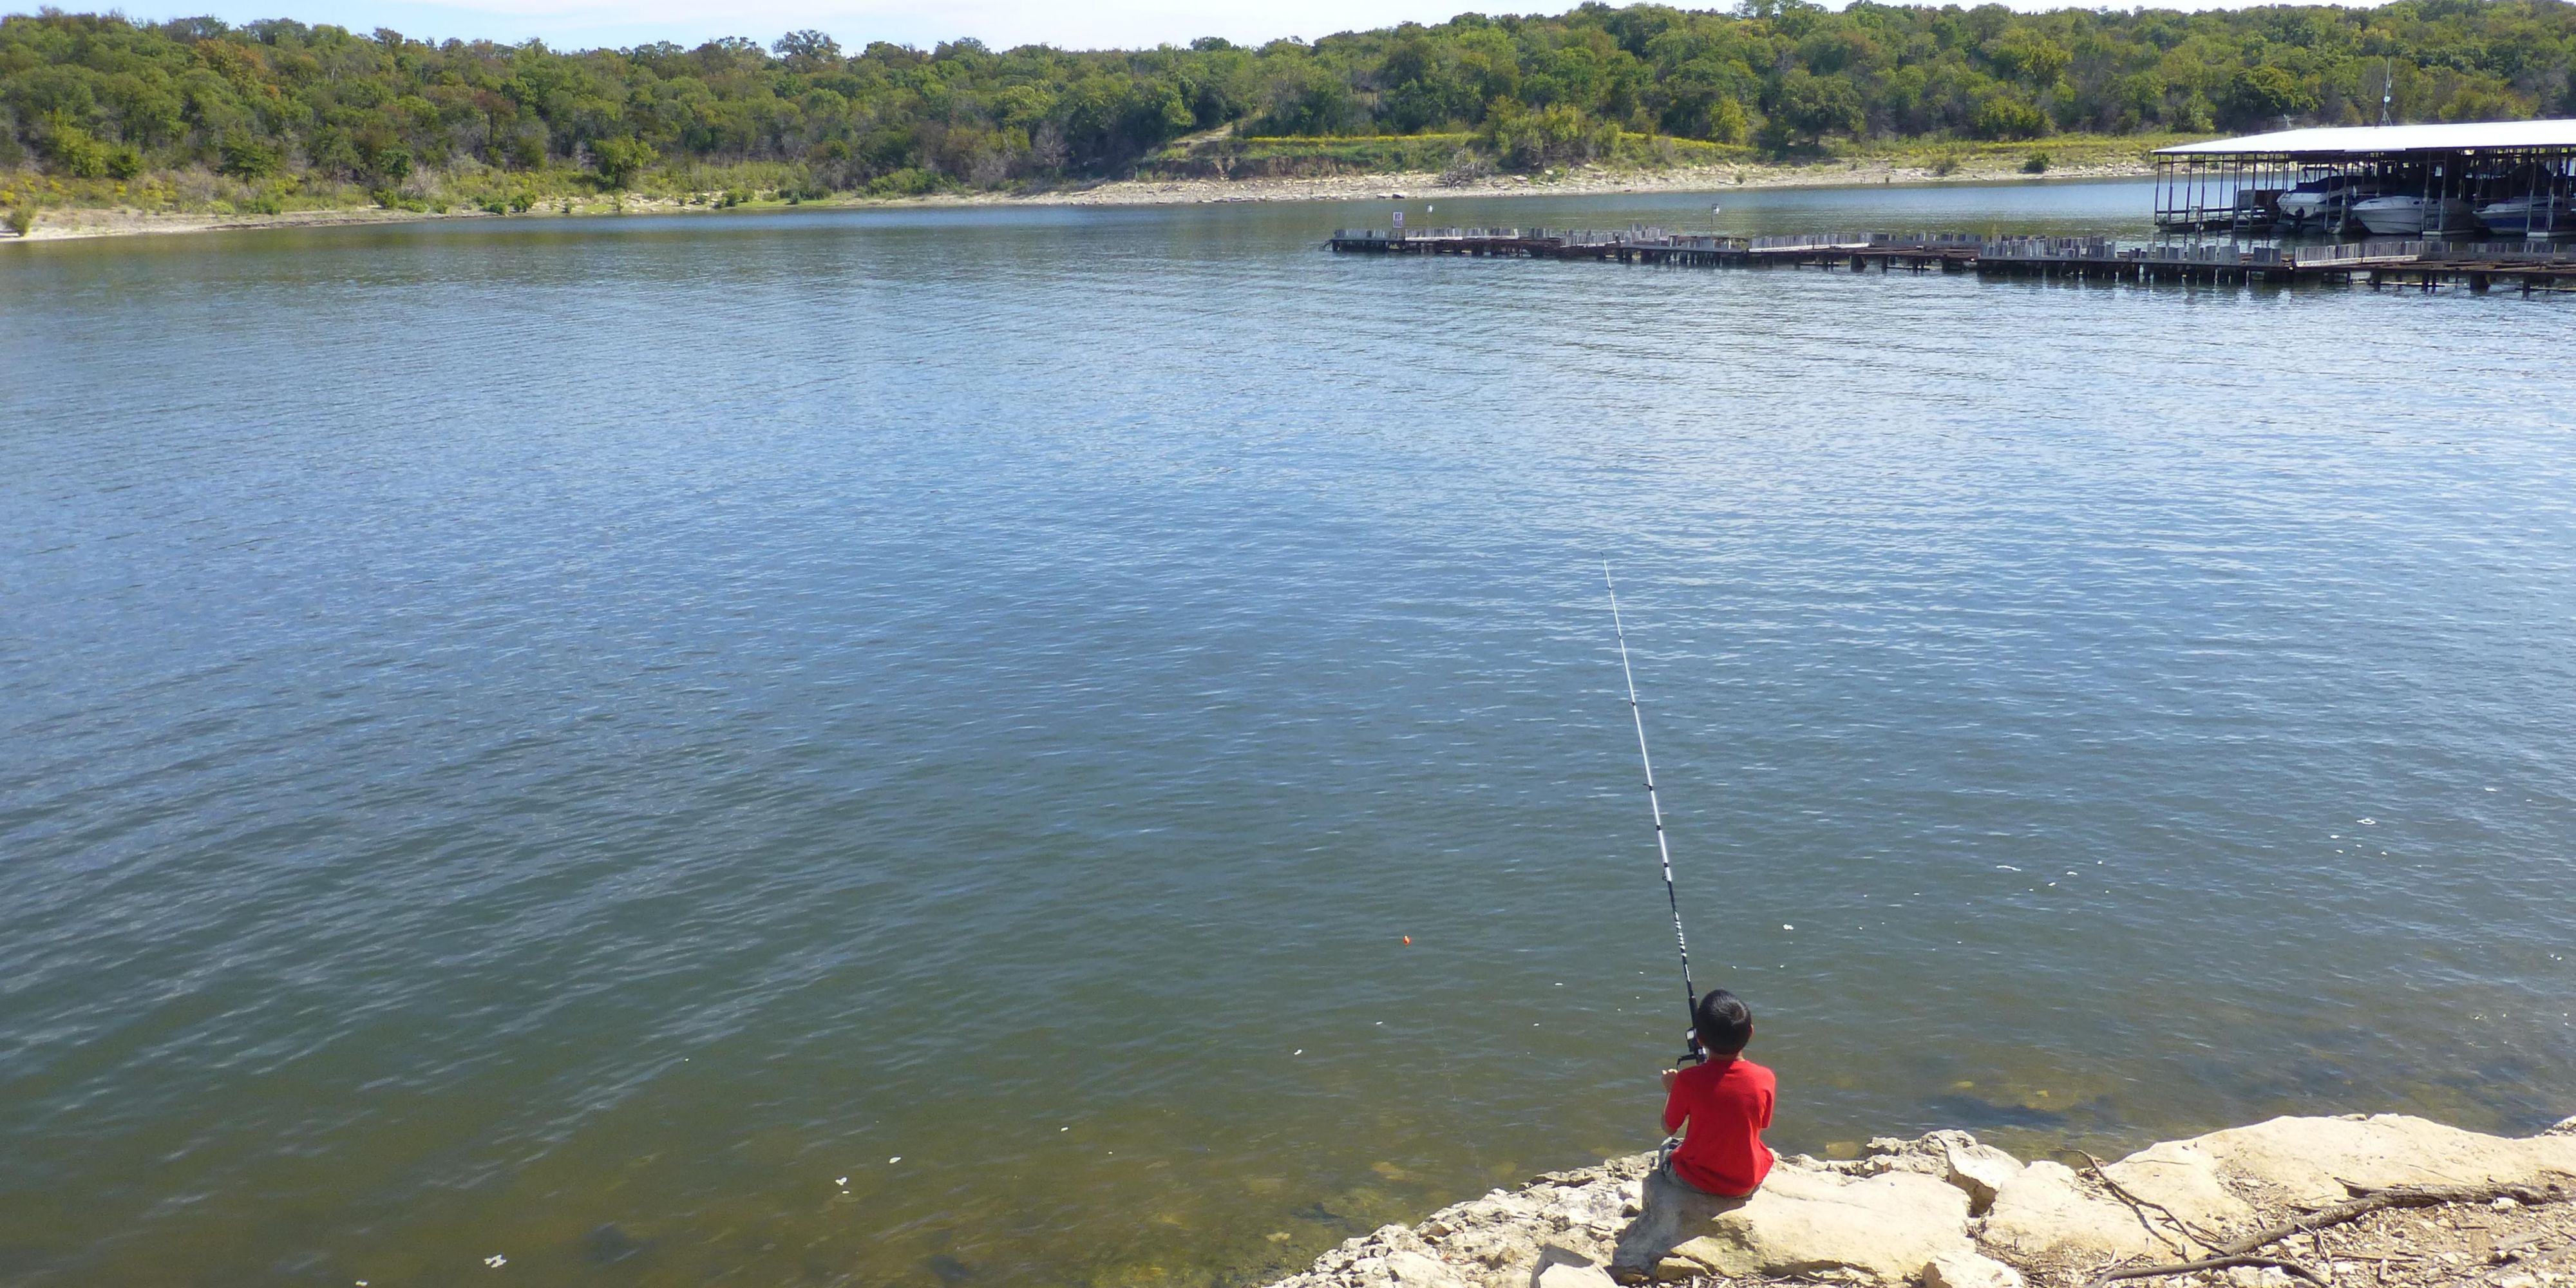 Enjoy natural beauty and fresh air abound during your stay at our hotel in Durant. Conveniently located near Lake Texoma where walkers have plenty of paths to explore along with fishing, golf and more. We also recommend visiting Fort Washita during your stay, a National Historic Landmark.
